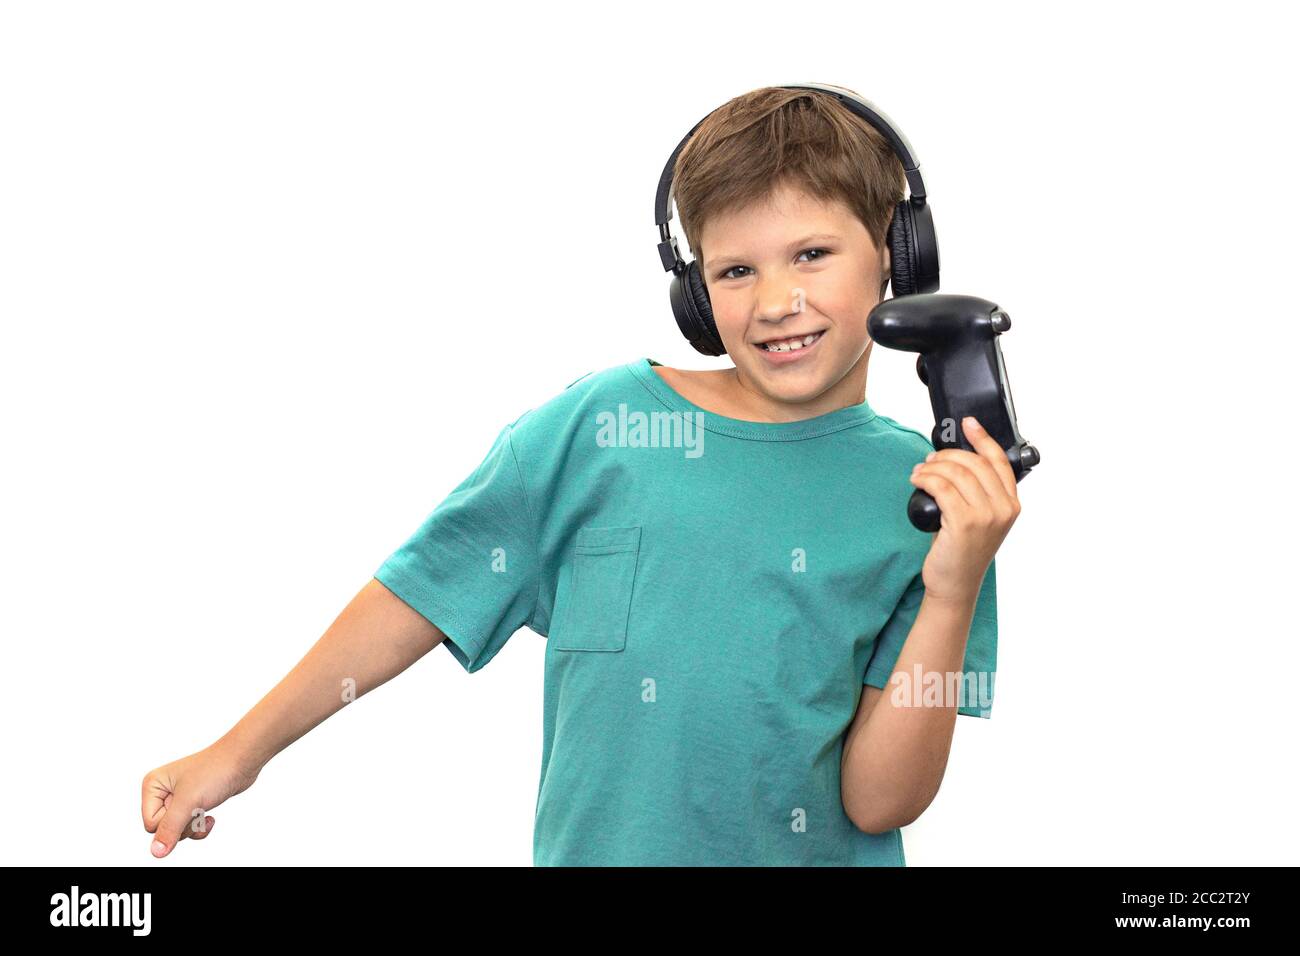 Boy plays a computer game with headphones and a joystick, game console. Stock Photo